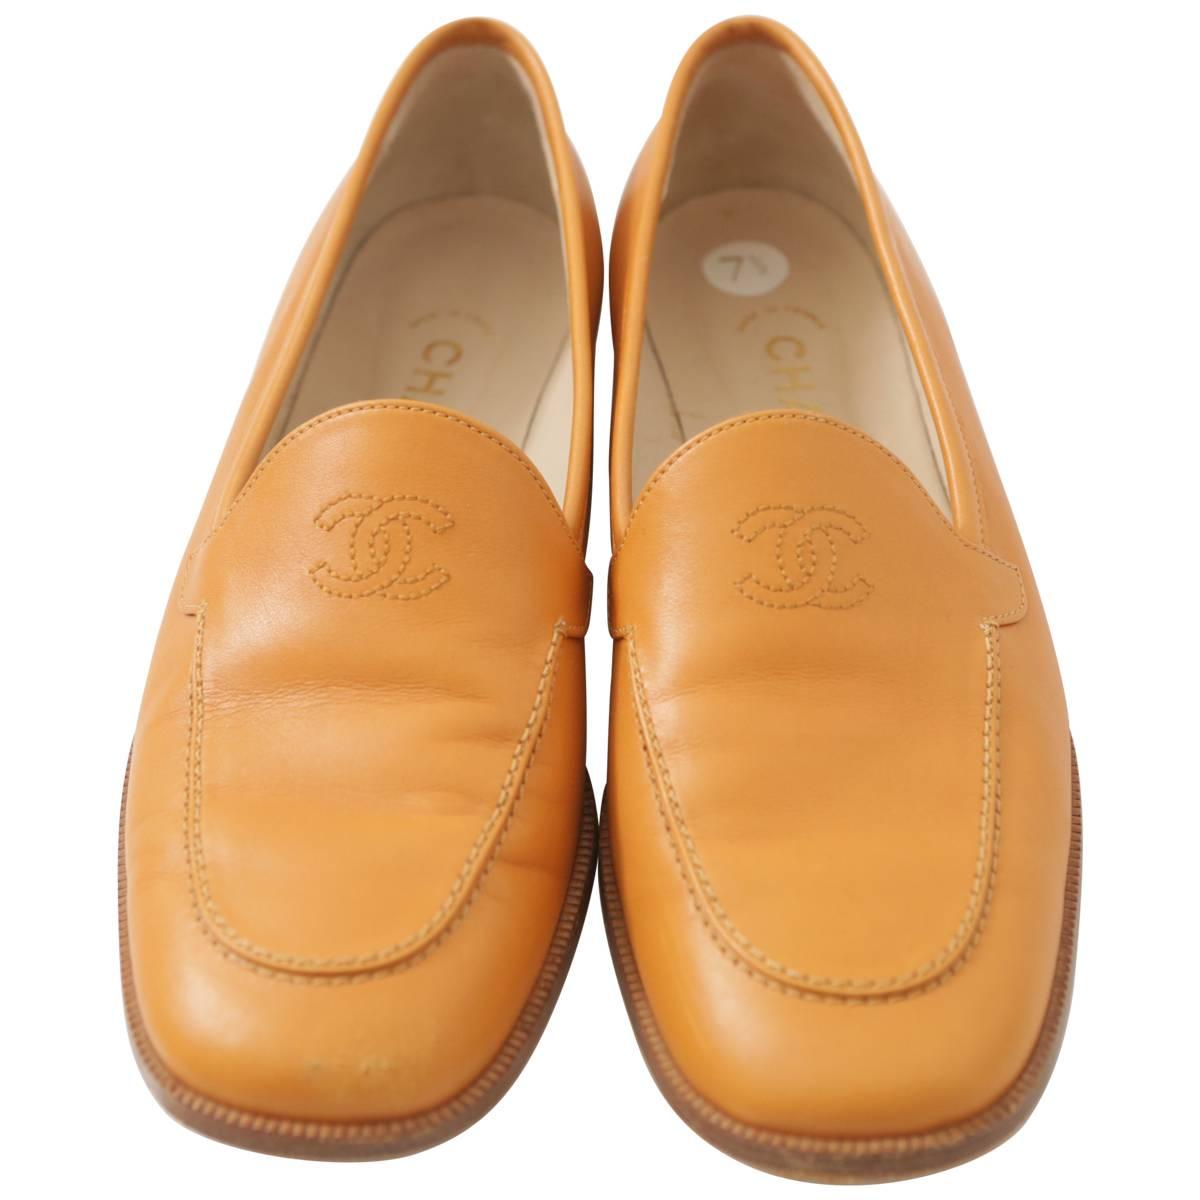 Chanel Tan Leather Loafer W/ 'CC' Logo